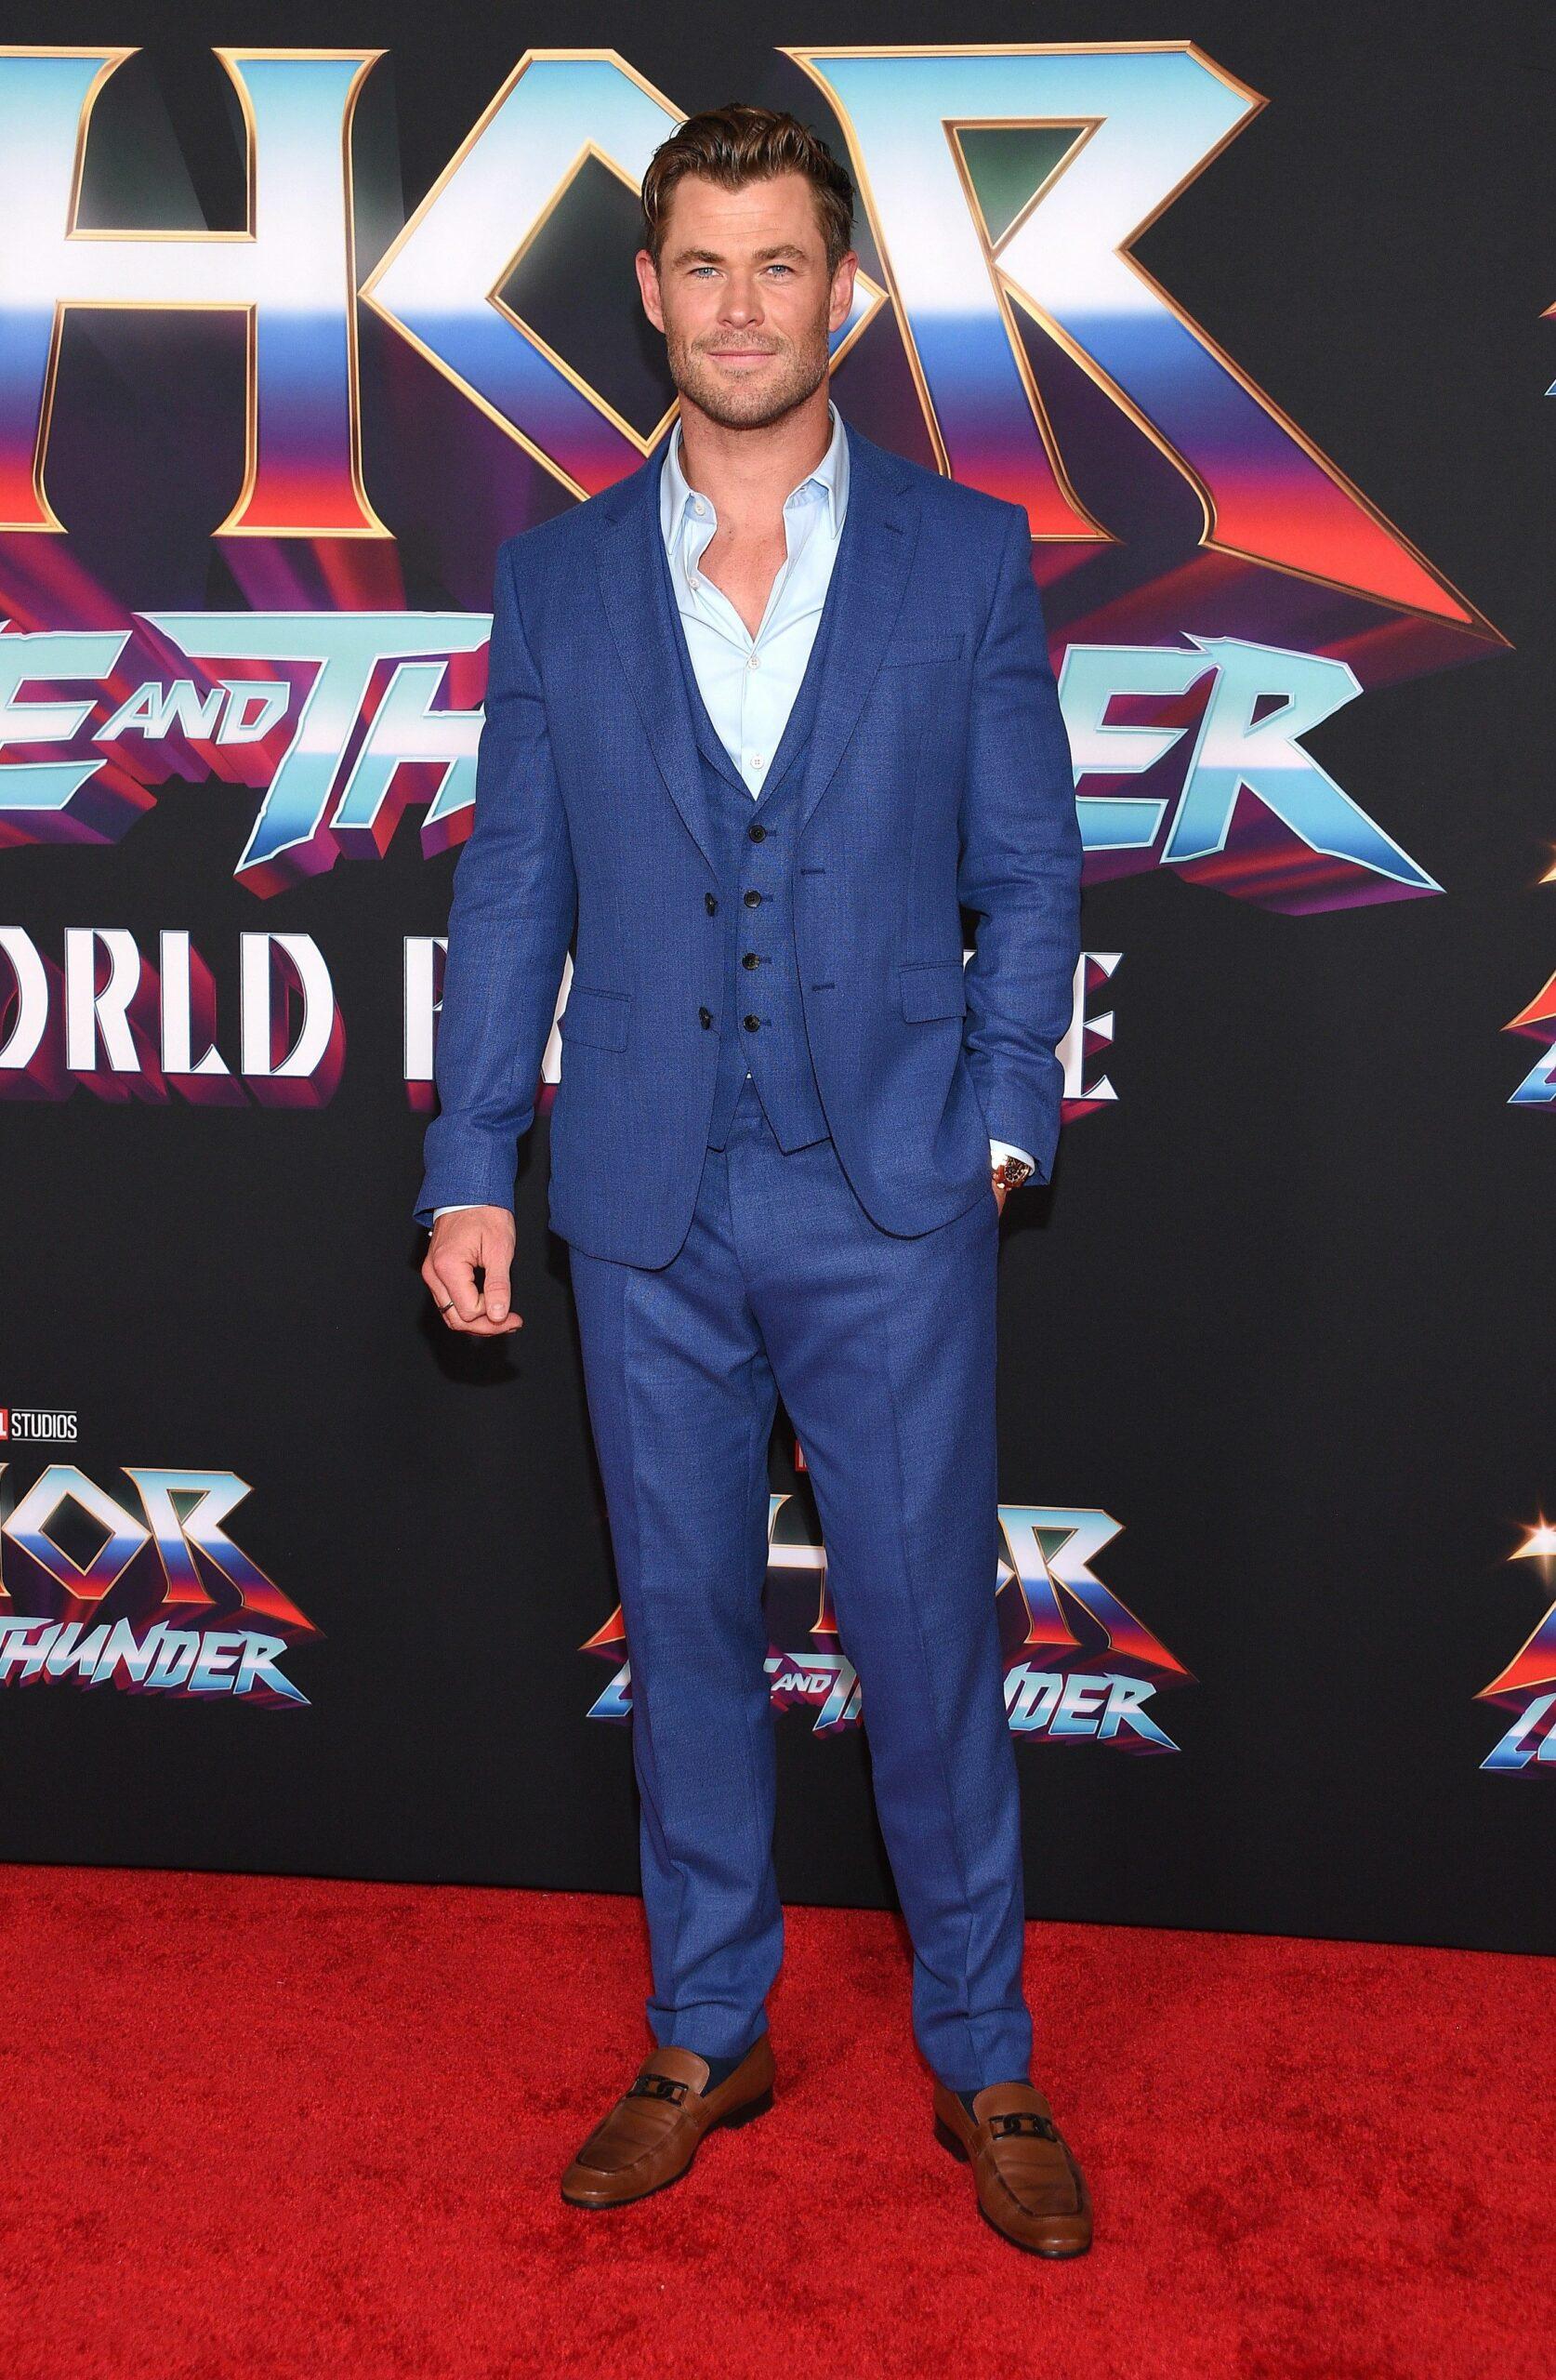 Chris Hemsworth arriving to the Thor: Love and Thunder World Premiere at TCL Chinese Theatre on June 23, 2022 in Hollywood, CA. Â© OConnor/AFF-USA.com. 23 Jun 2022 Pictured: Chris Hemsworth. Photo credit: OConnor/AFF-USA.com / MEGA TheMegaAgency.com +1 888 505 6342 (Mega Agency TagID: MEGA871506_003.jpg) [Photo via Mega Agency]